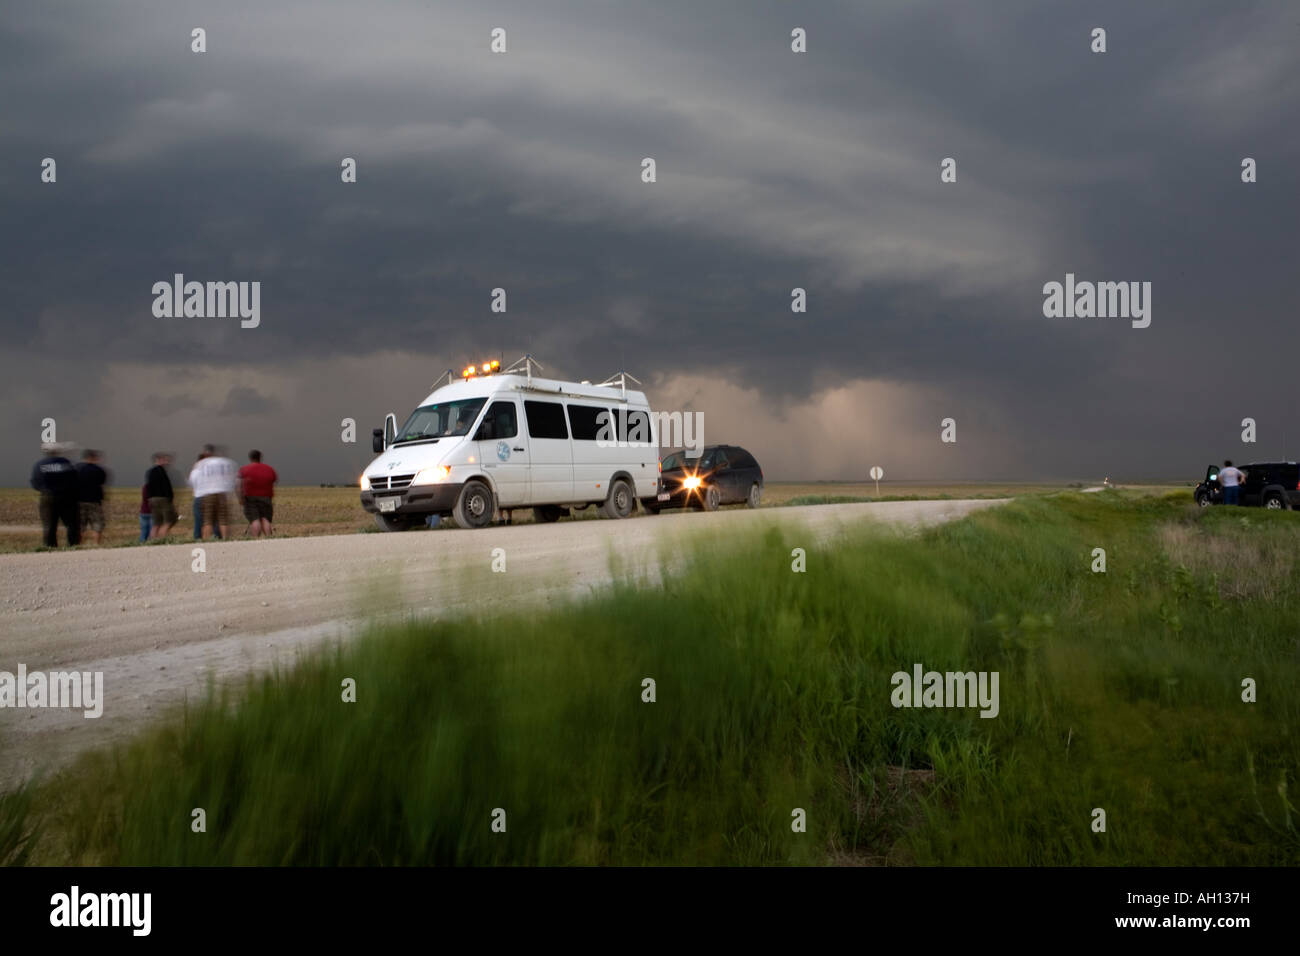 Tornado chasers' truck shoots Imax from inside storms (photos) - CNET